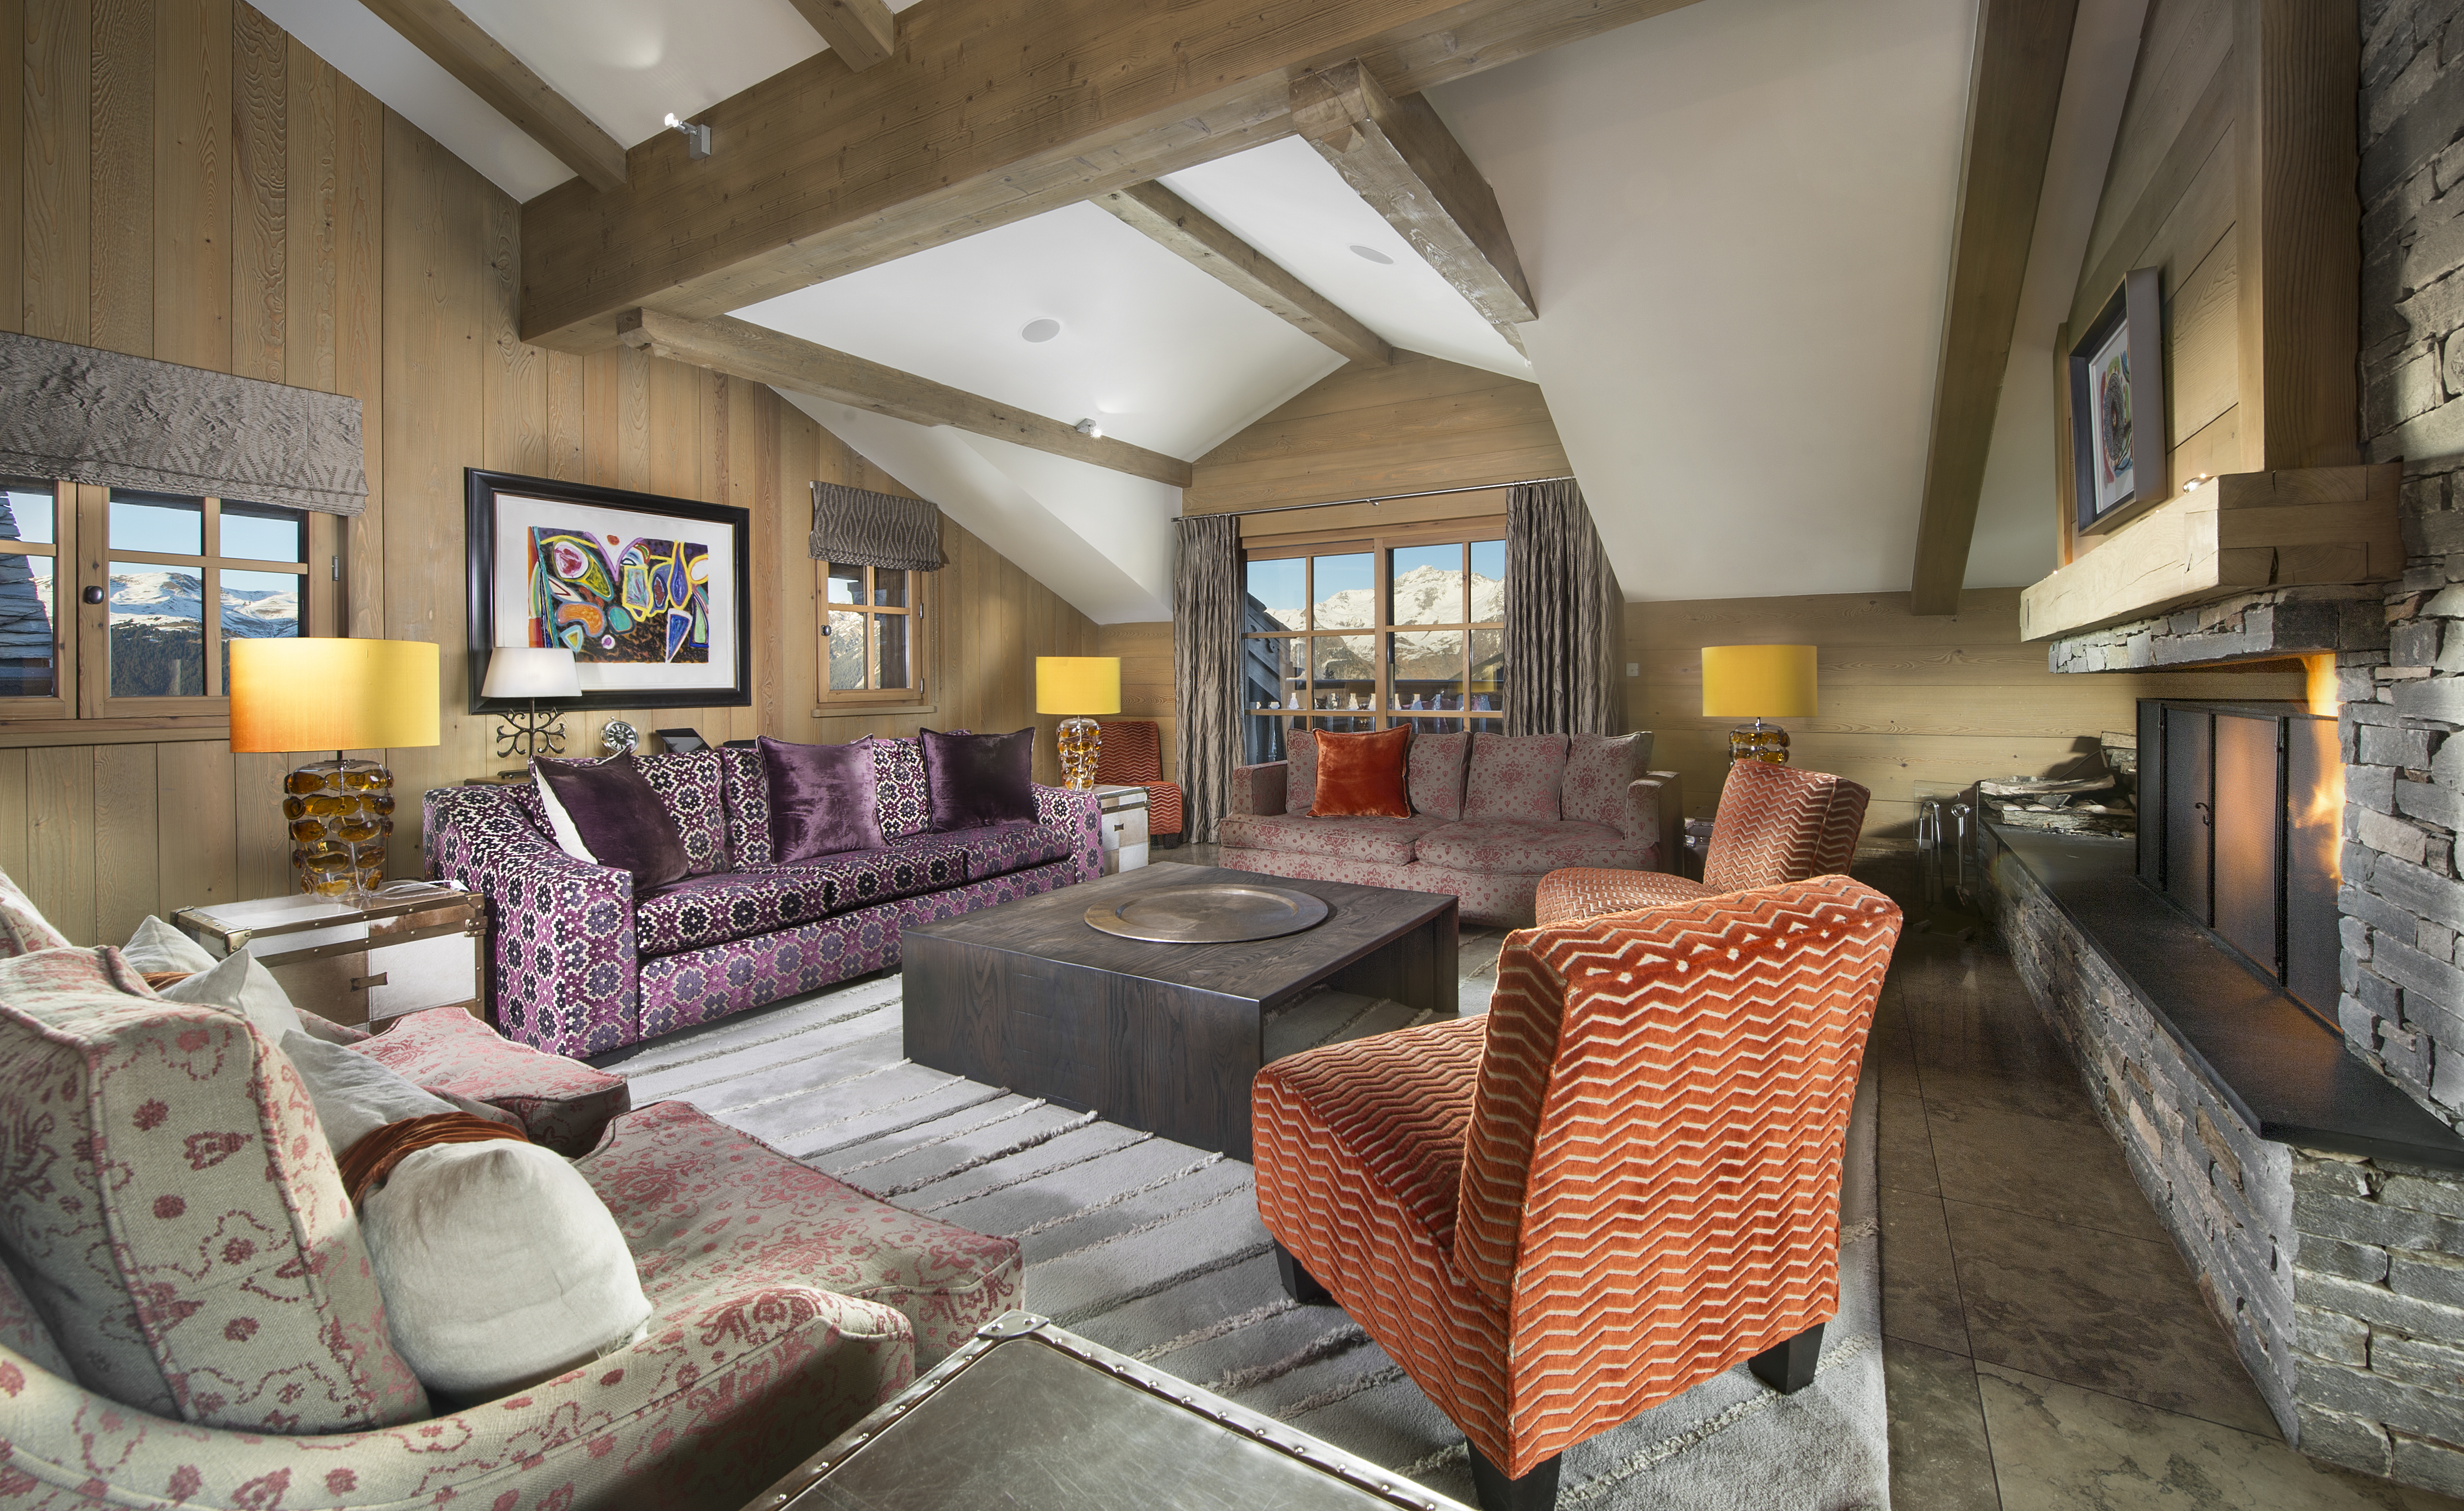 A French Alpine ski chalet, 'Le Blanchot' in Courchevel 1850